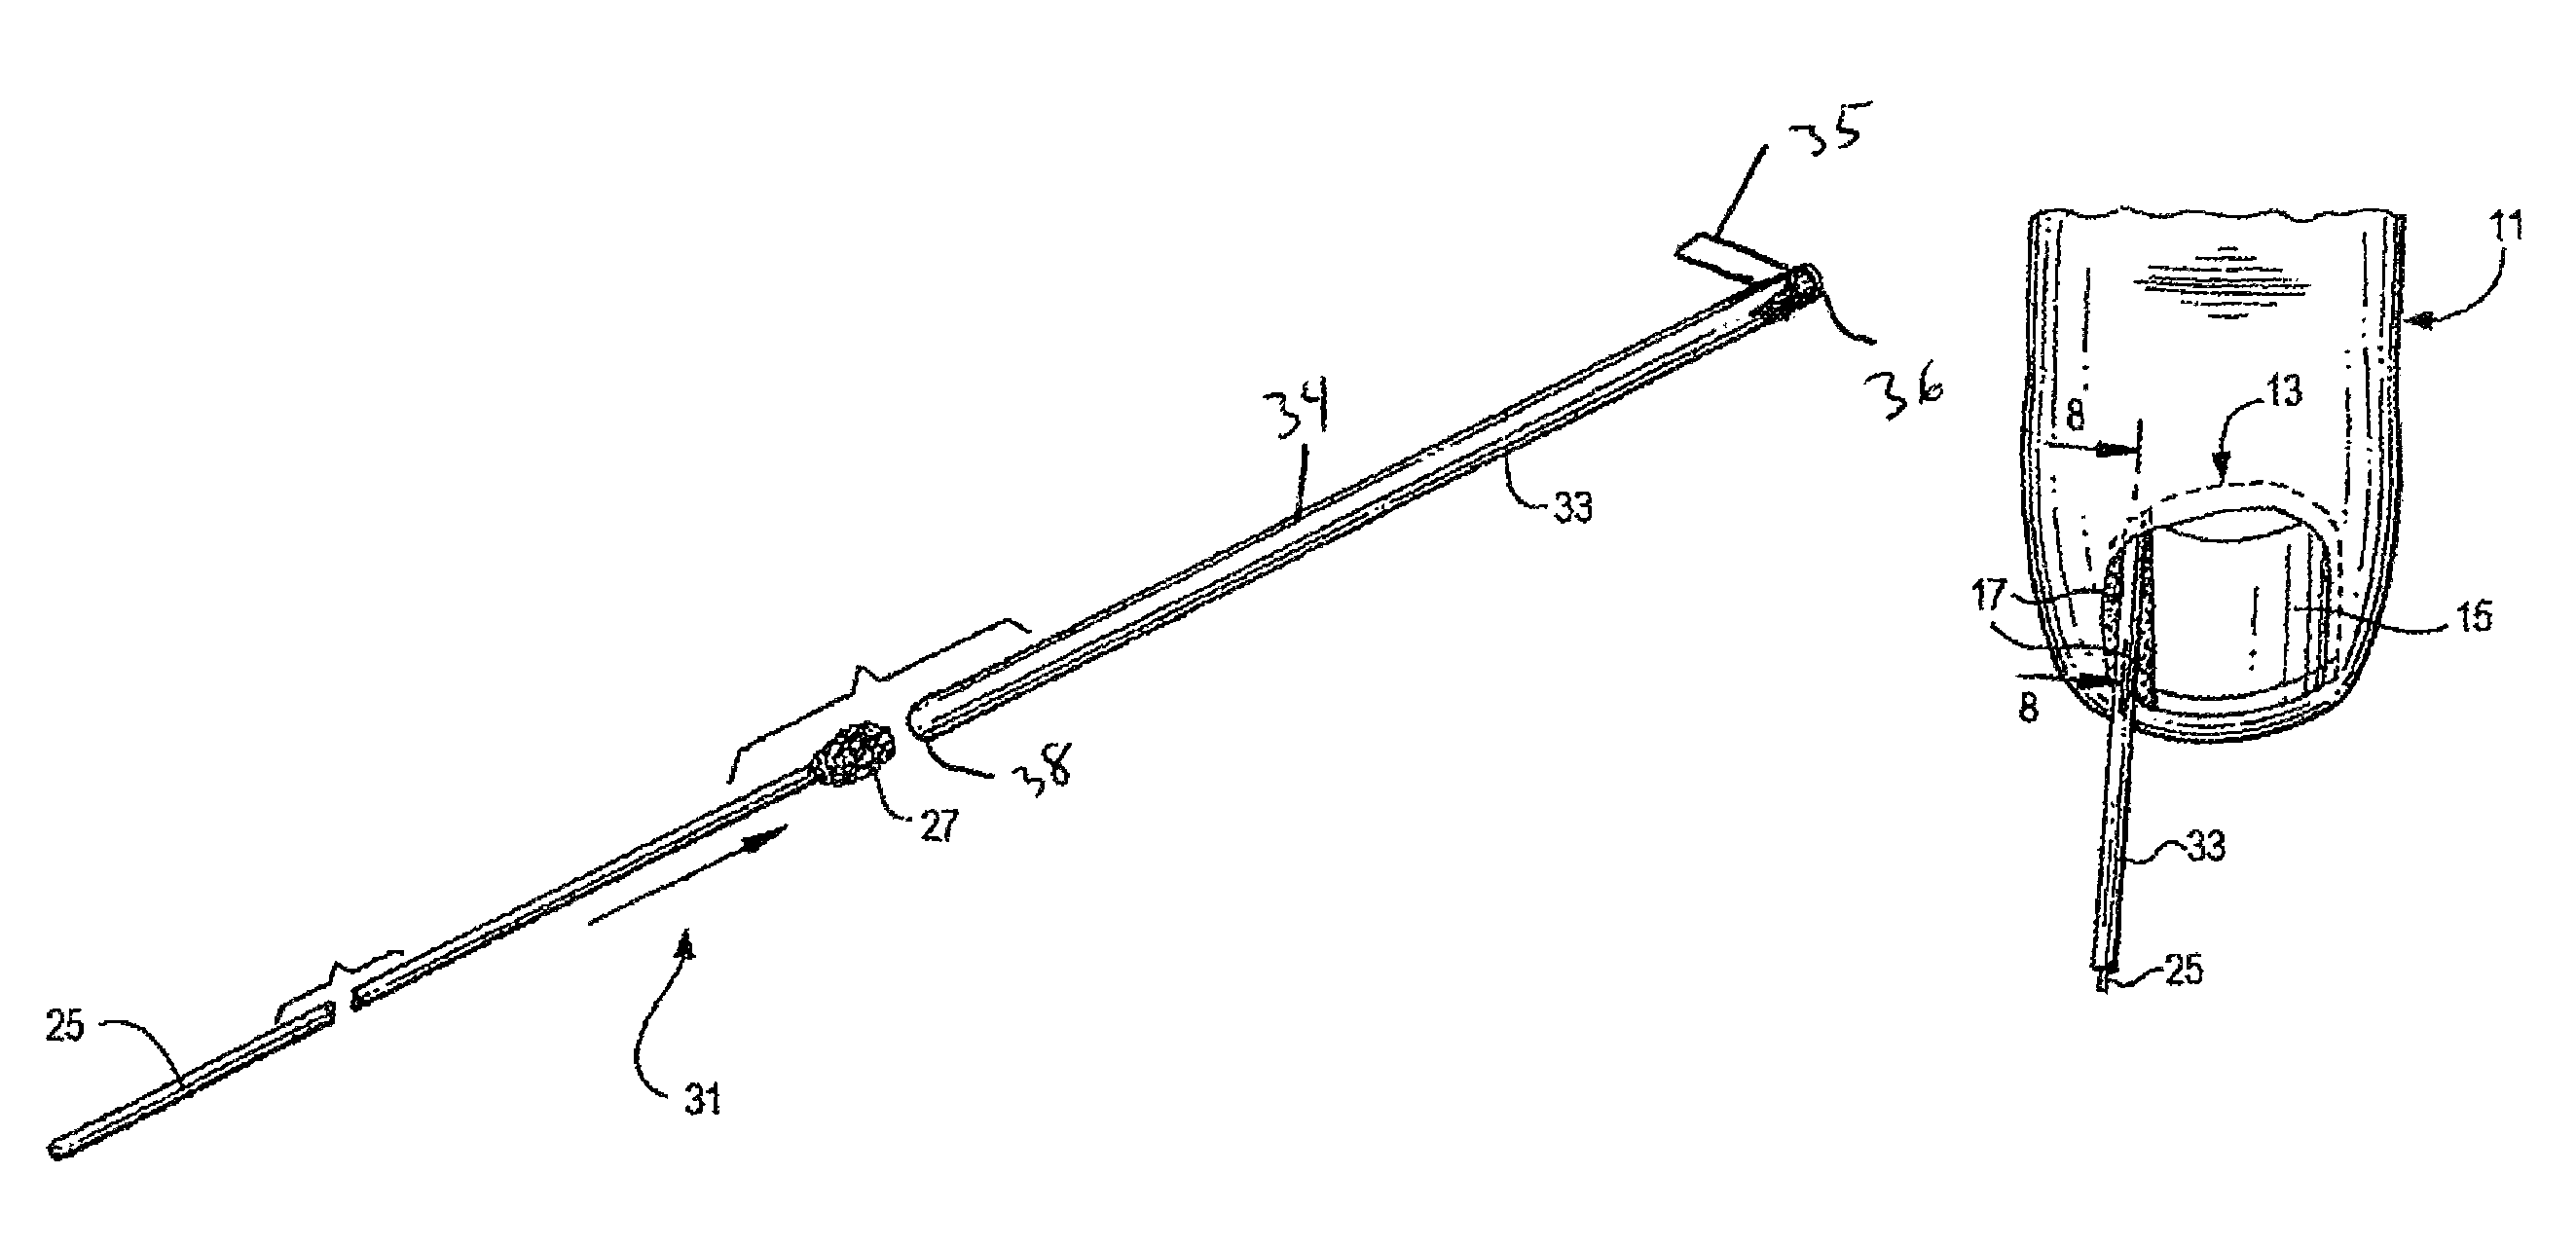 Device and method of treating a nail condition